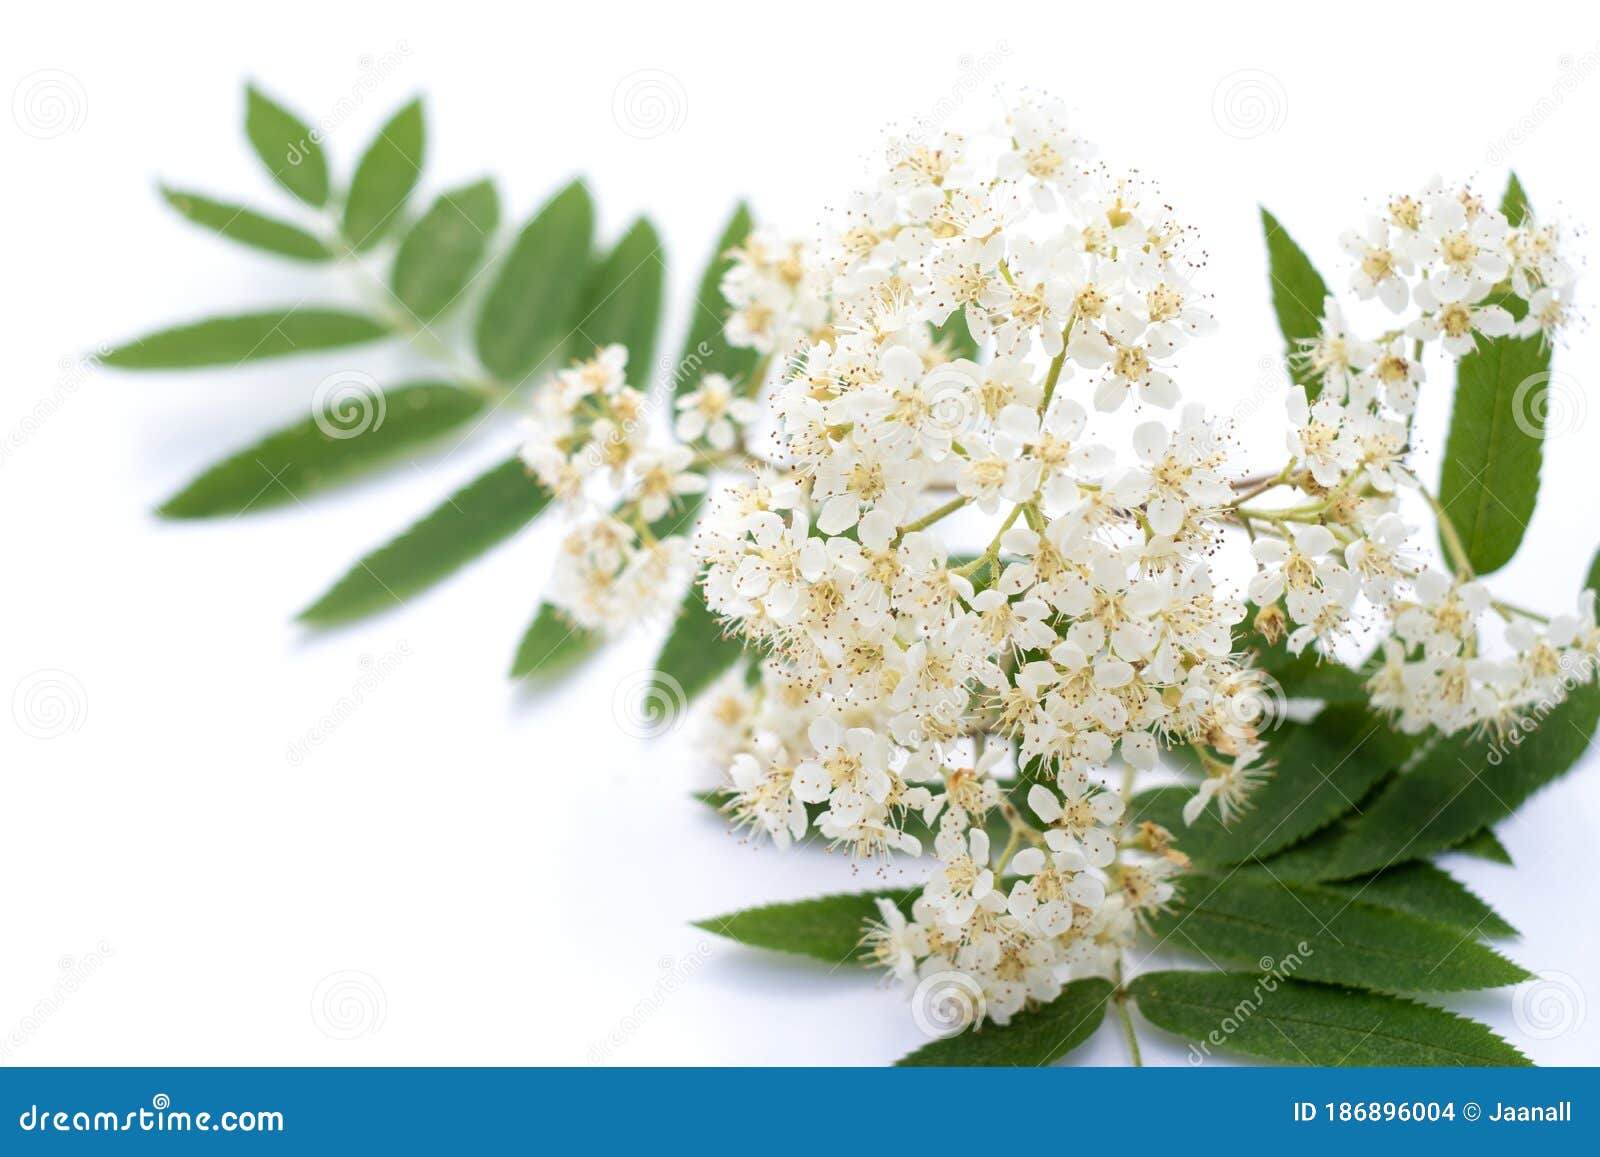 Rowan Flower Isolated on a White Background Stock Photo - Image of ...